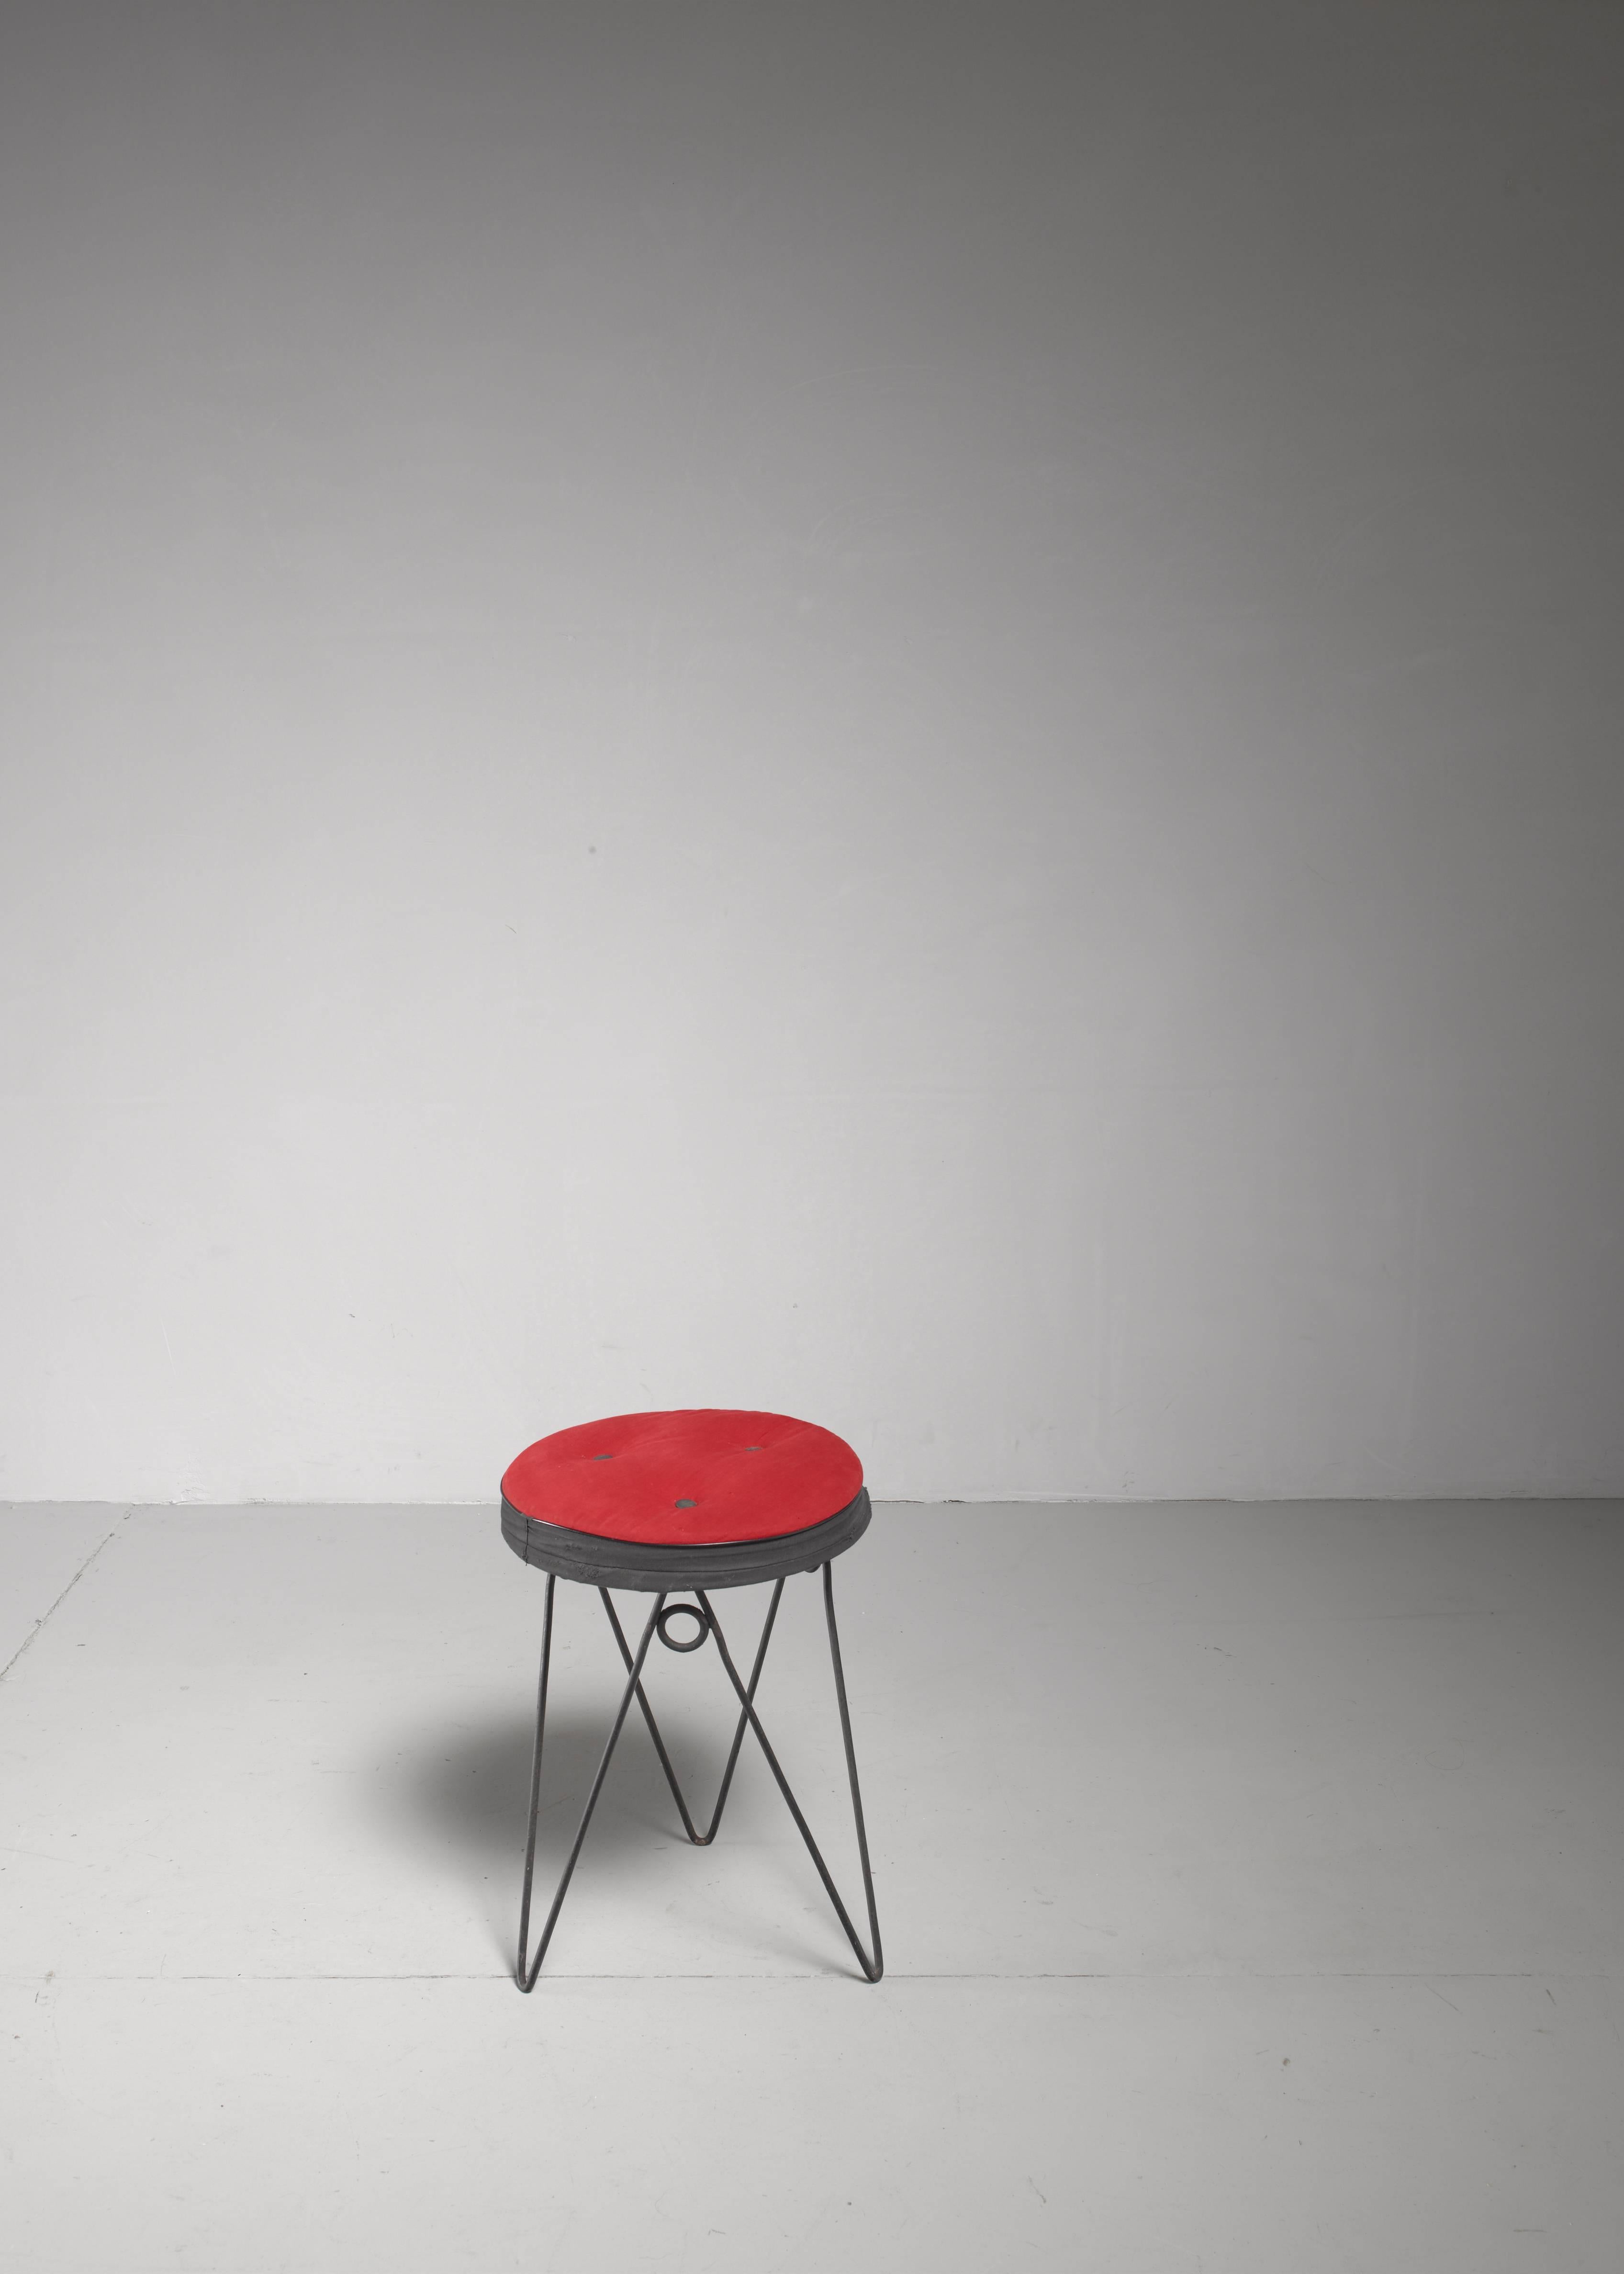 A 1950s French stool. The stool is made of a playful iron hairpin frame with a black and red fabric seat pad. 

The seat pad has been professionally restored, using the original fabric. Only the foam has been replaced.